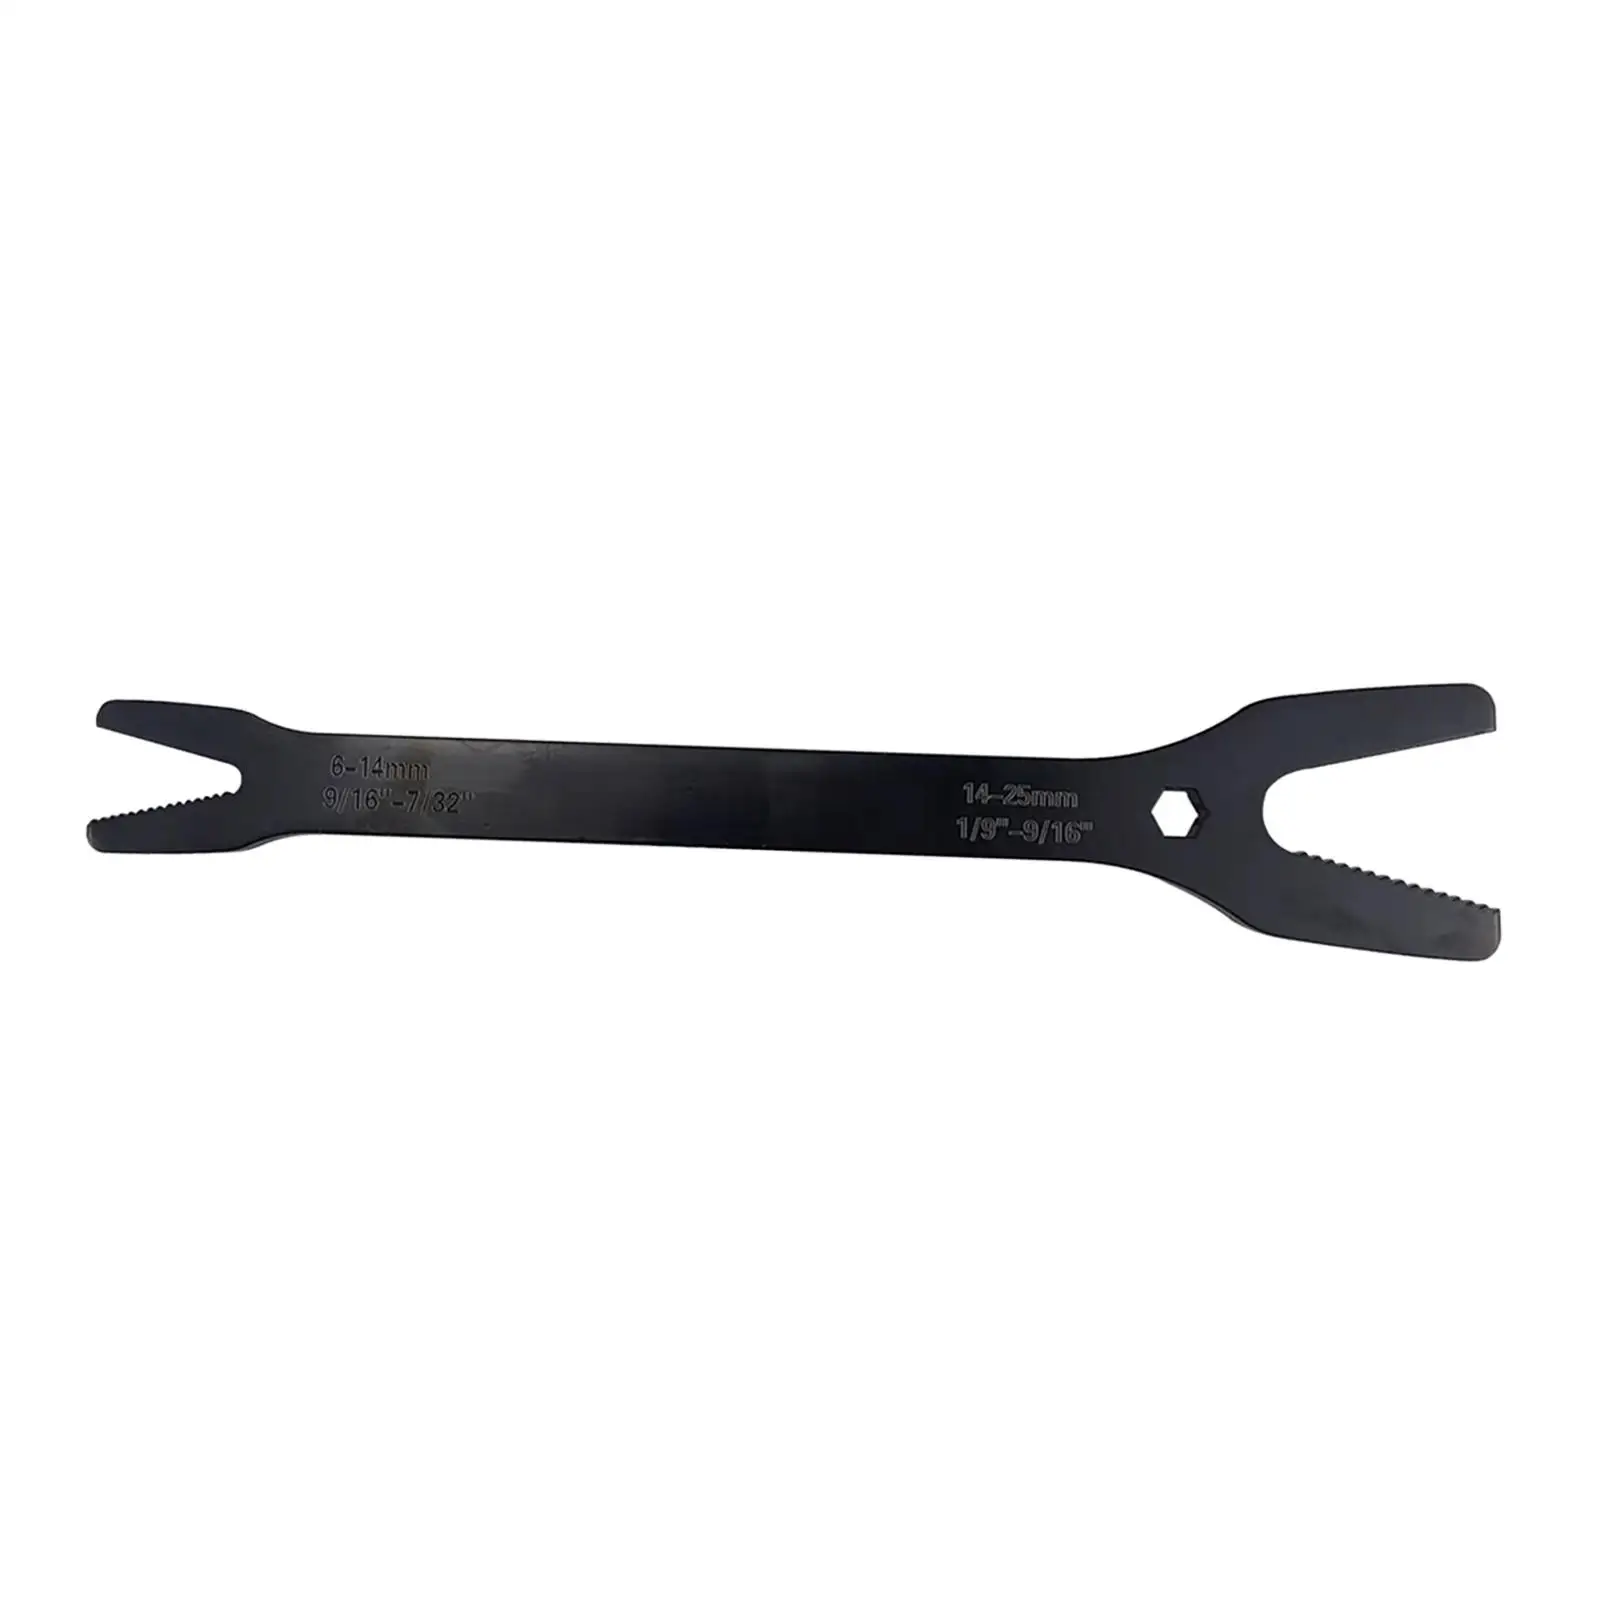 Universal Wrench Self Tightening Household 6-25mm Double Head Wrench for Home Construction Maintenance Tool Repairing